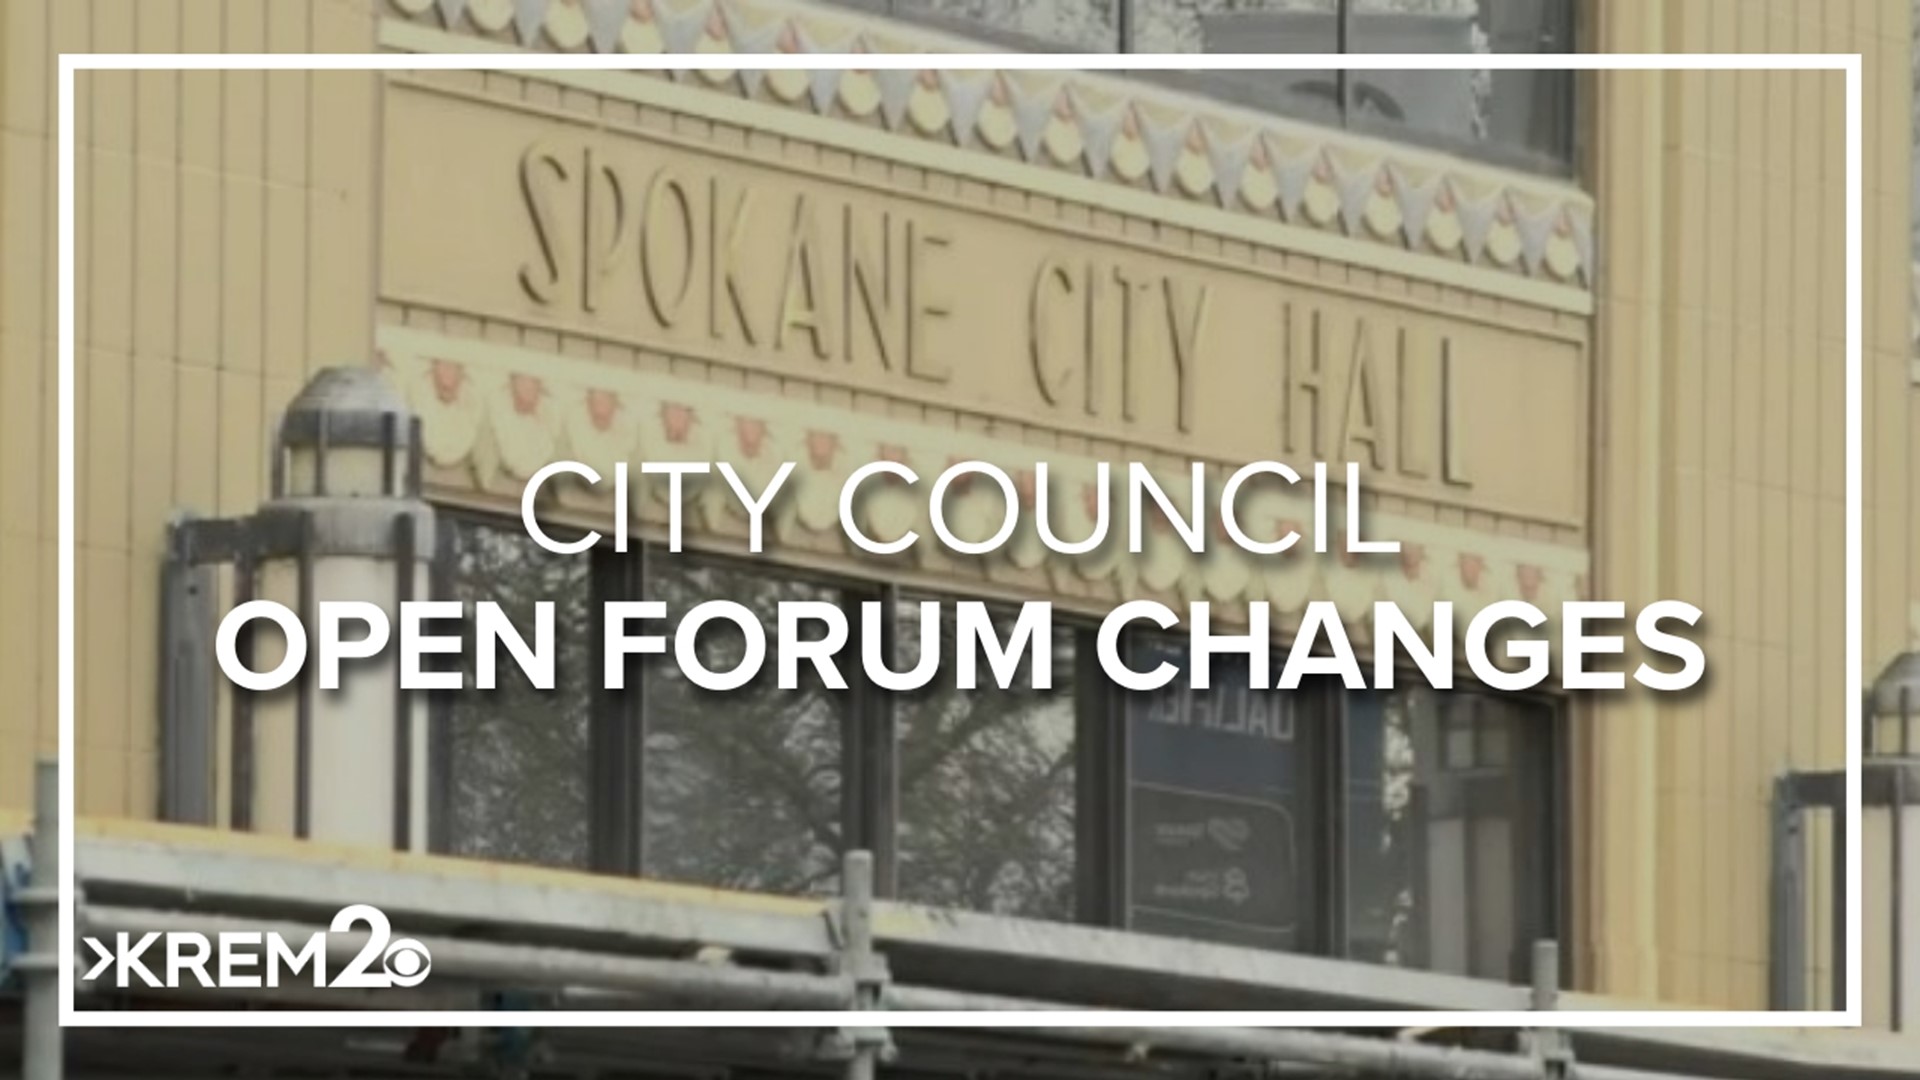 Monday night's meeting brought more changes to city council's rules of procedures, particularly for the rules of public participation in meetings.